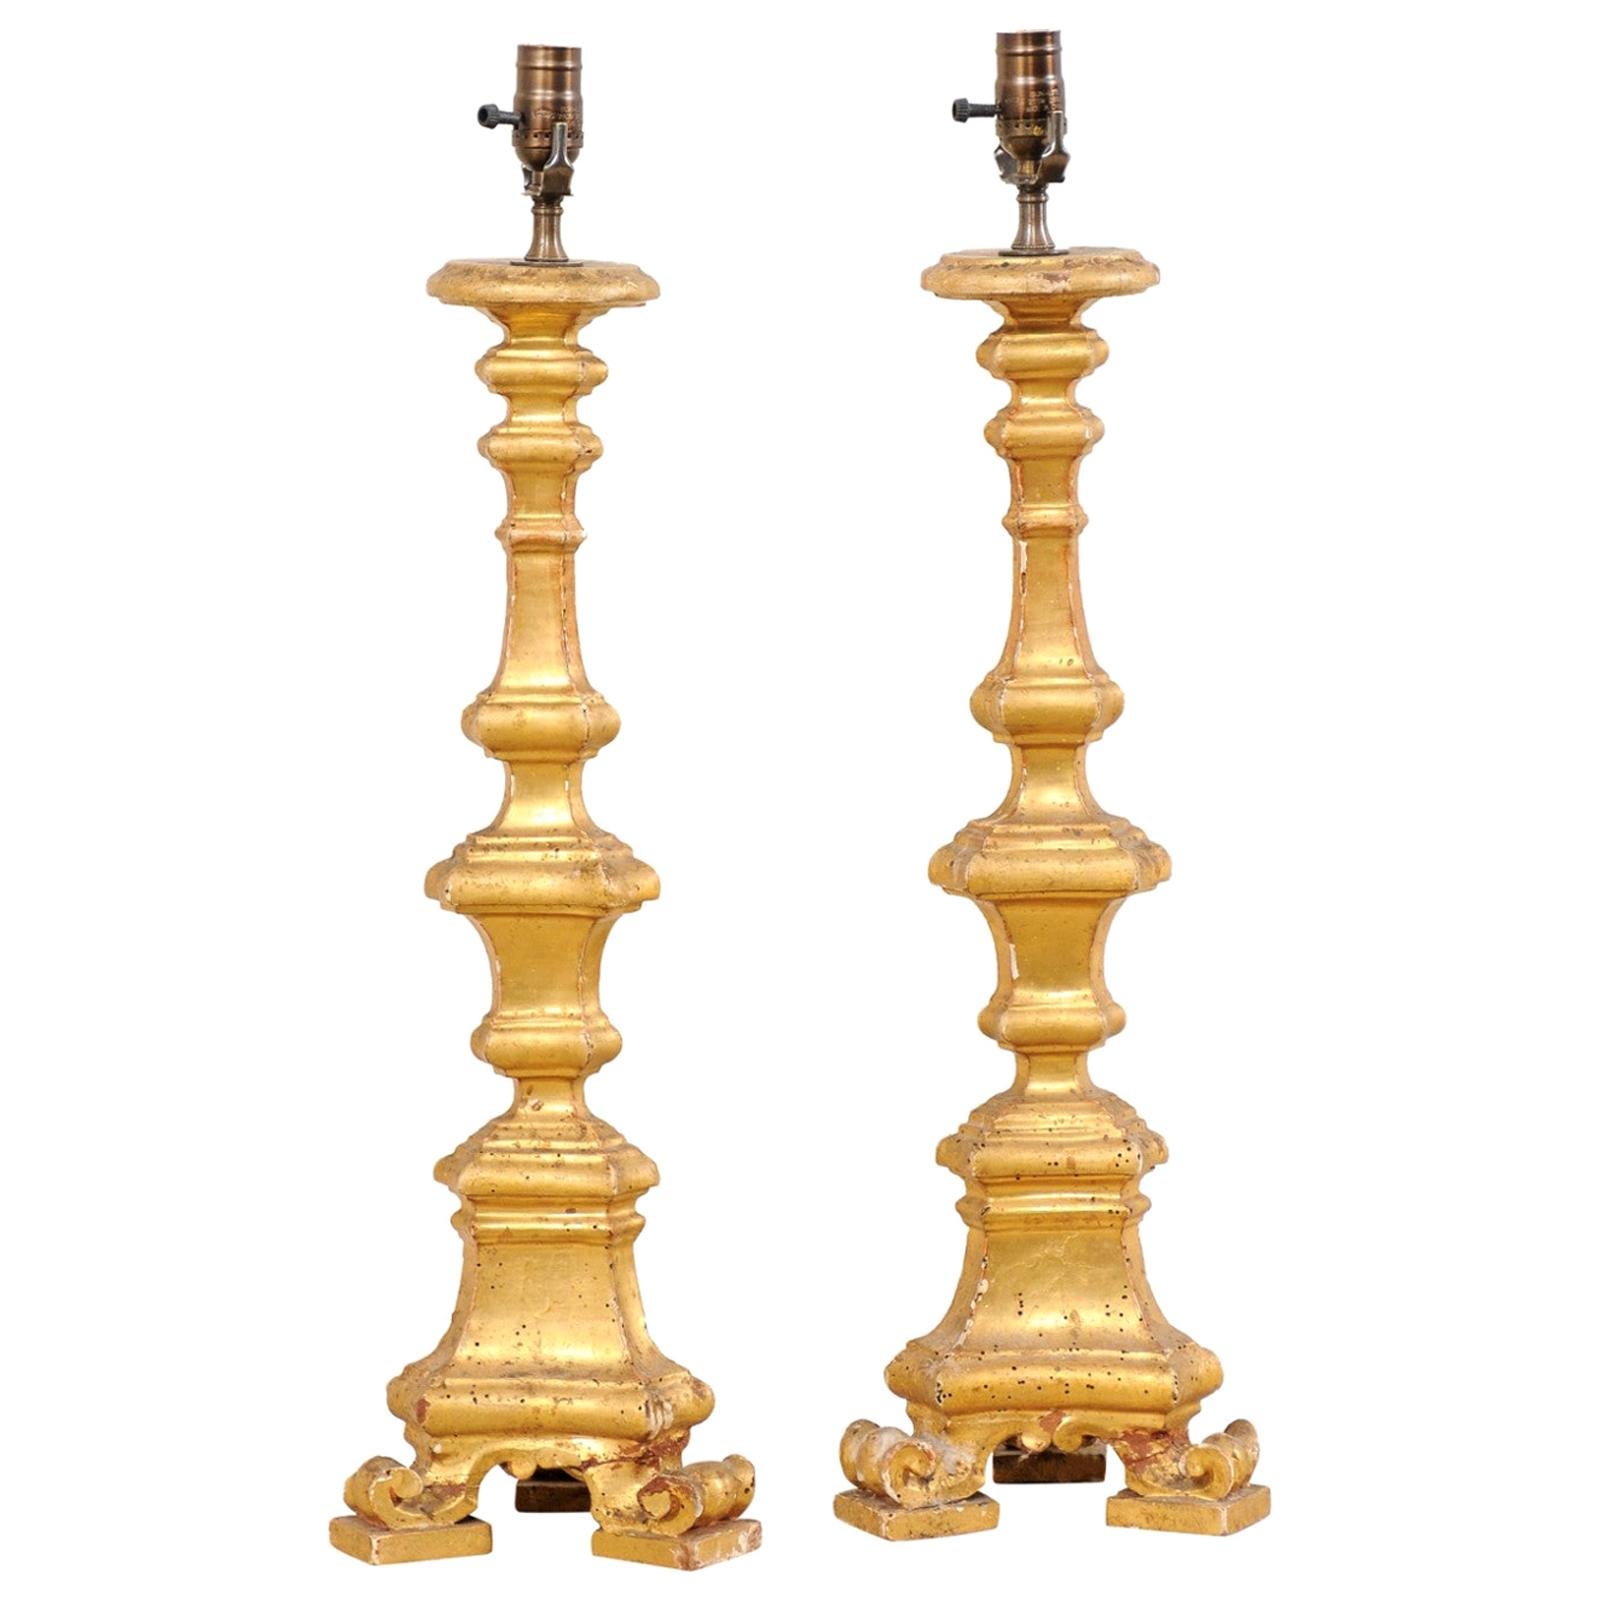 Italian Pair of 19th C. Candlestick Carved Table Lamps with Gilt Finish